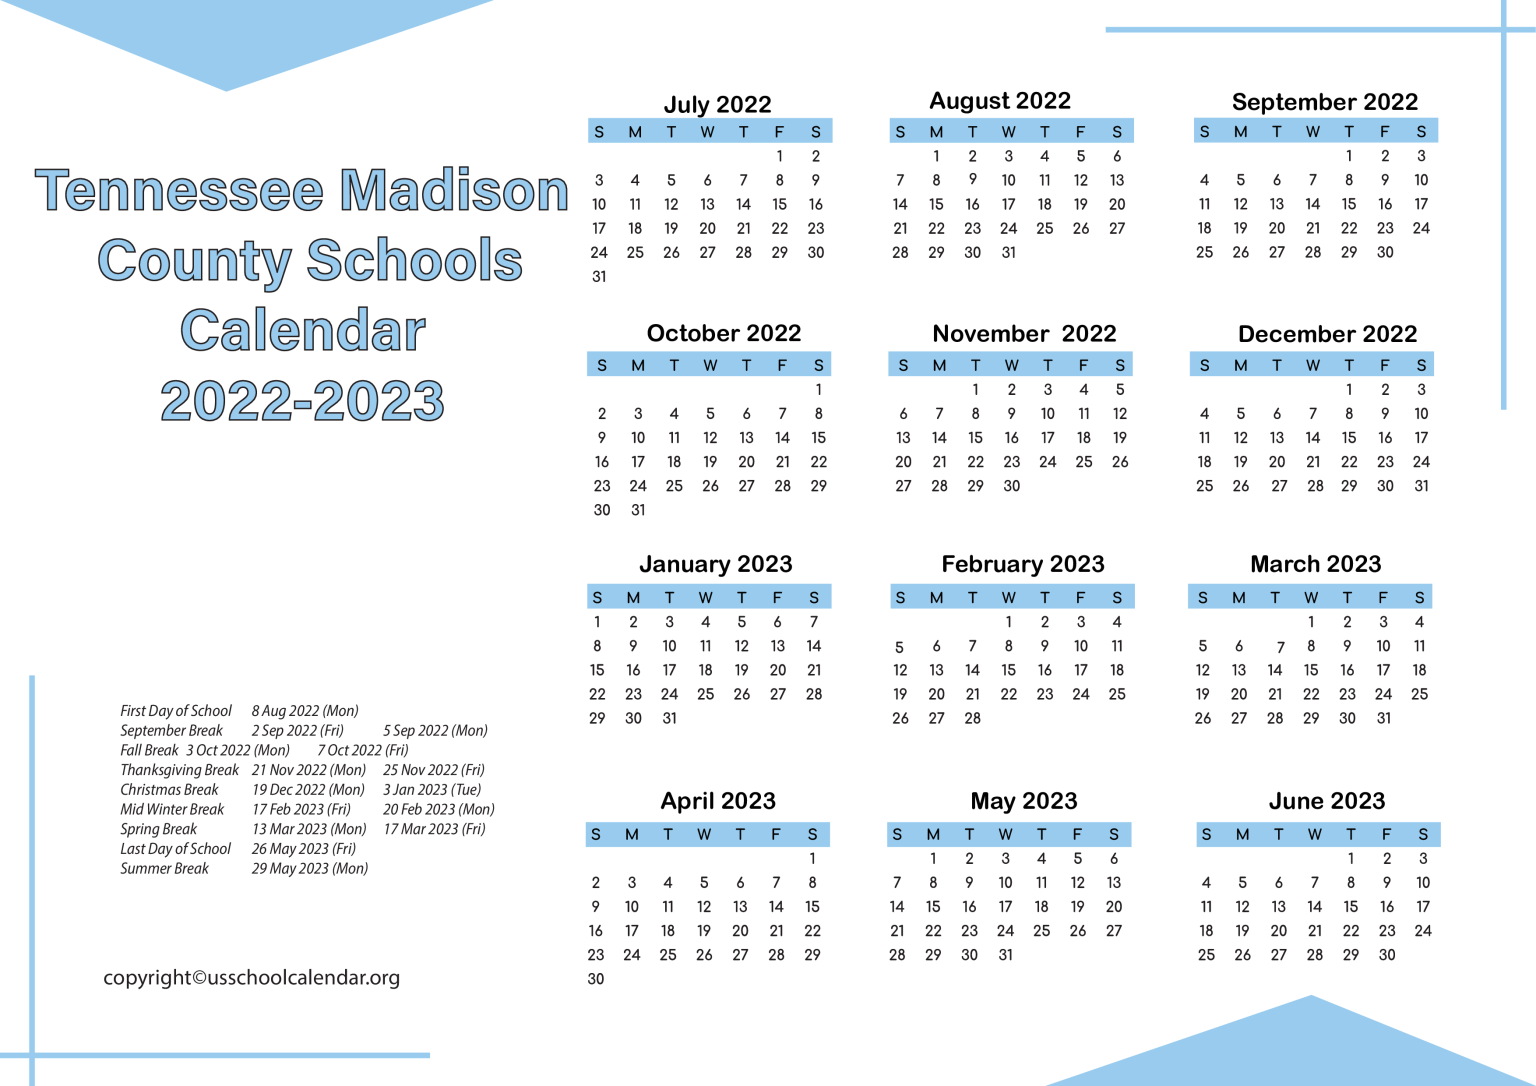 JMCSS Tennessee Madison County Schools Calendar 2023